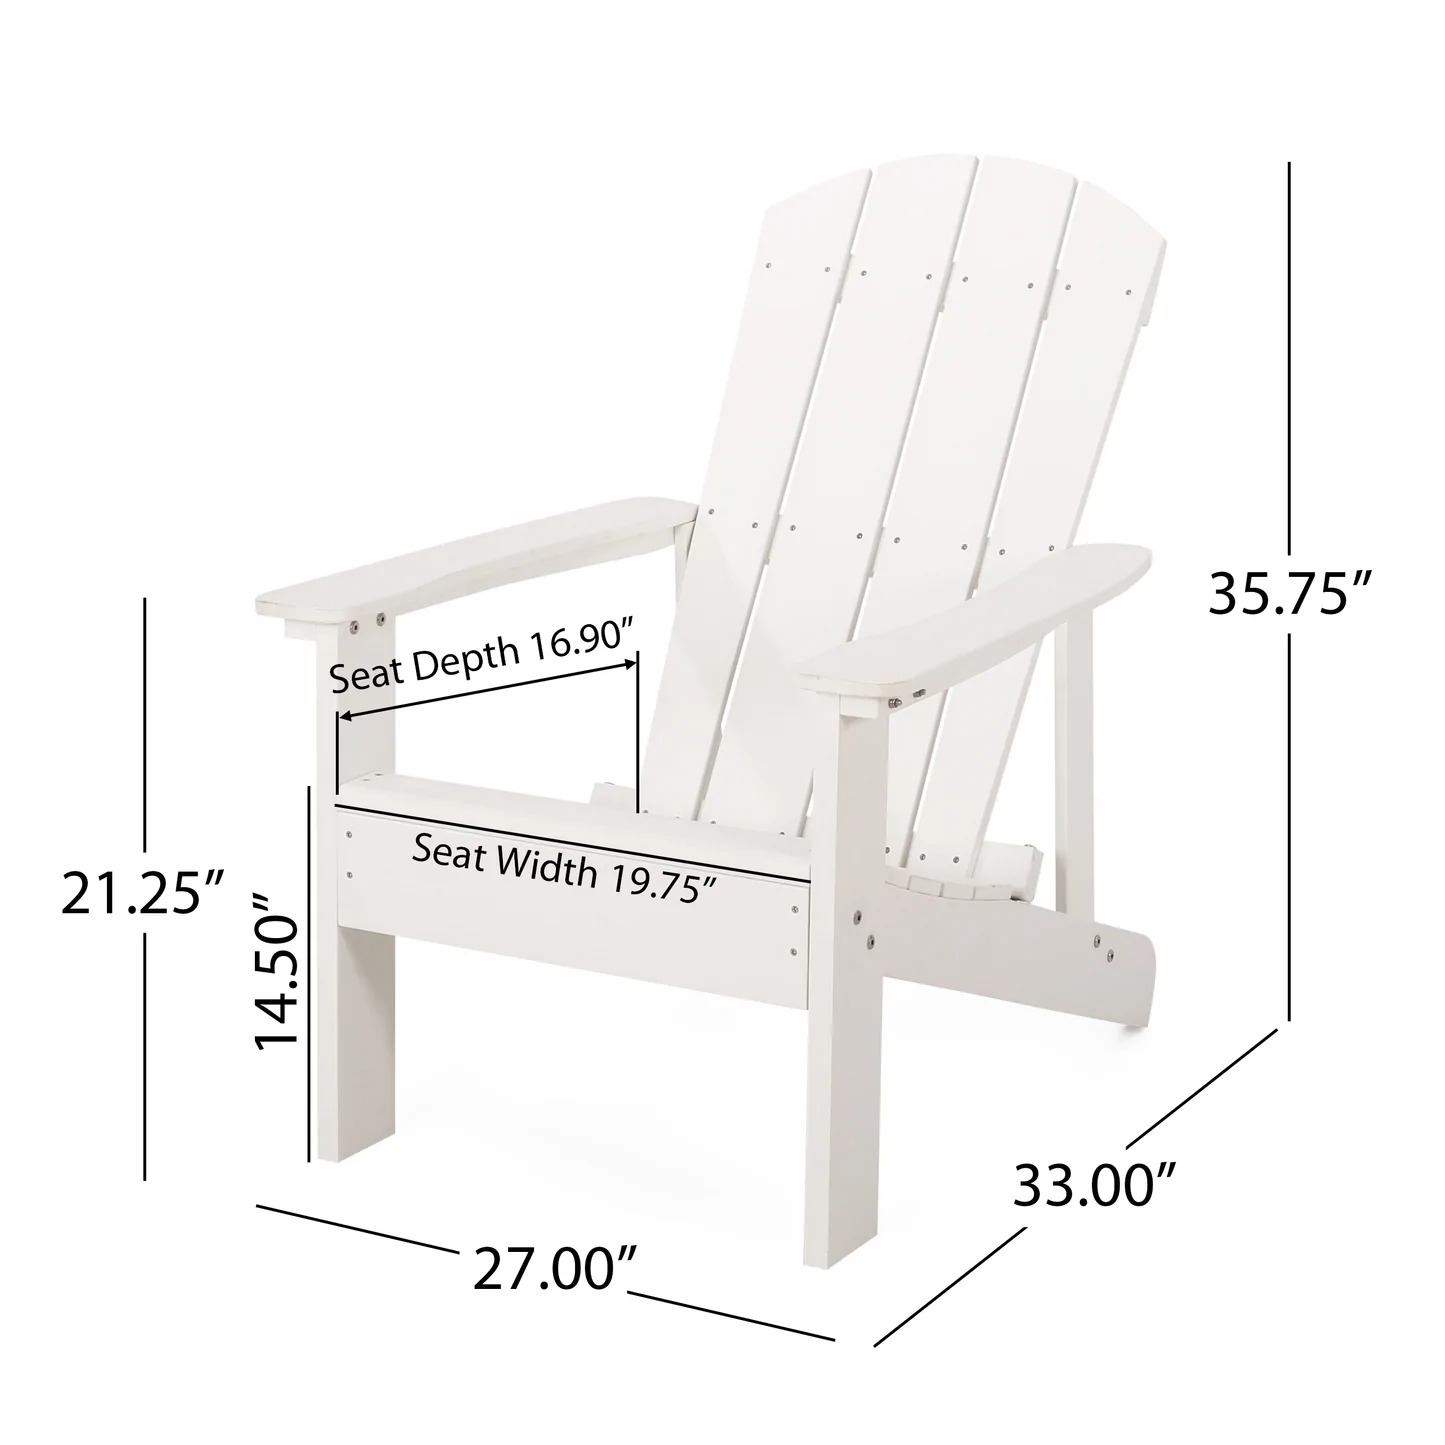 KUIKUI Classic Pure White Outdoor Solid Wood Adirondack Chair Garden Lounge Chair - image 4 of 5